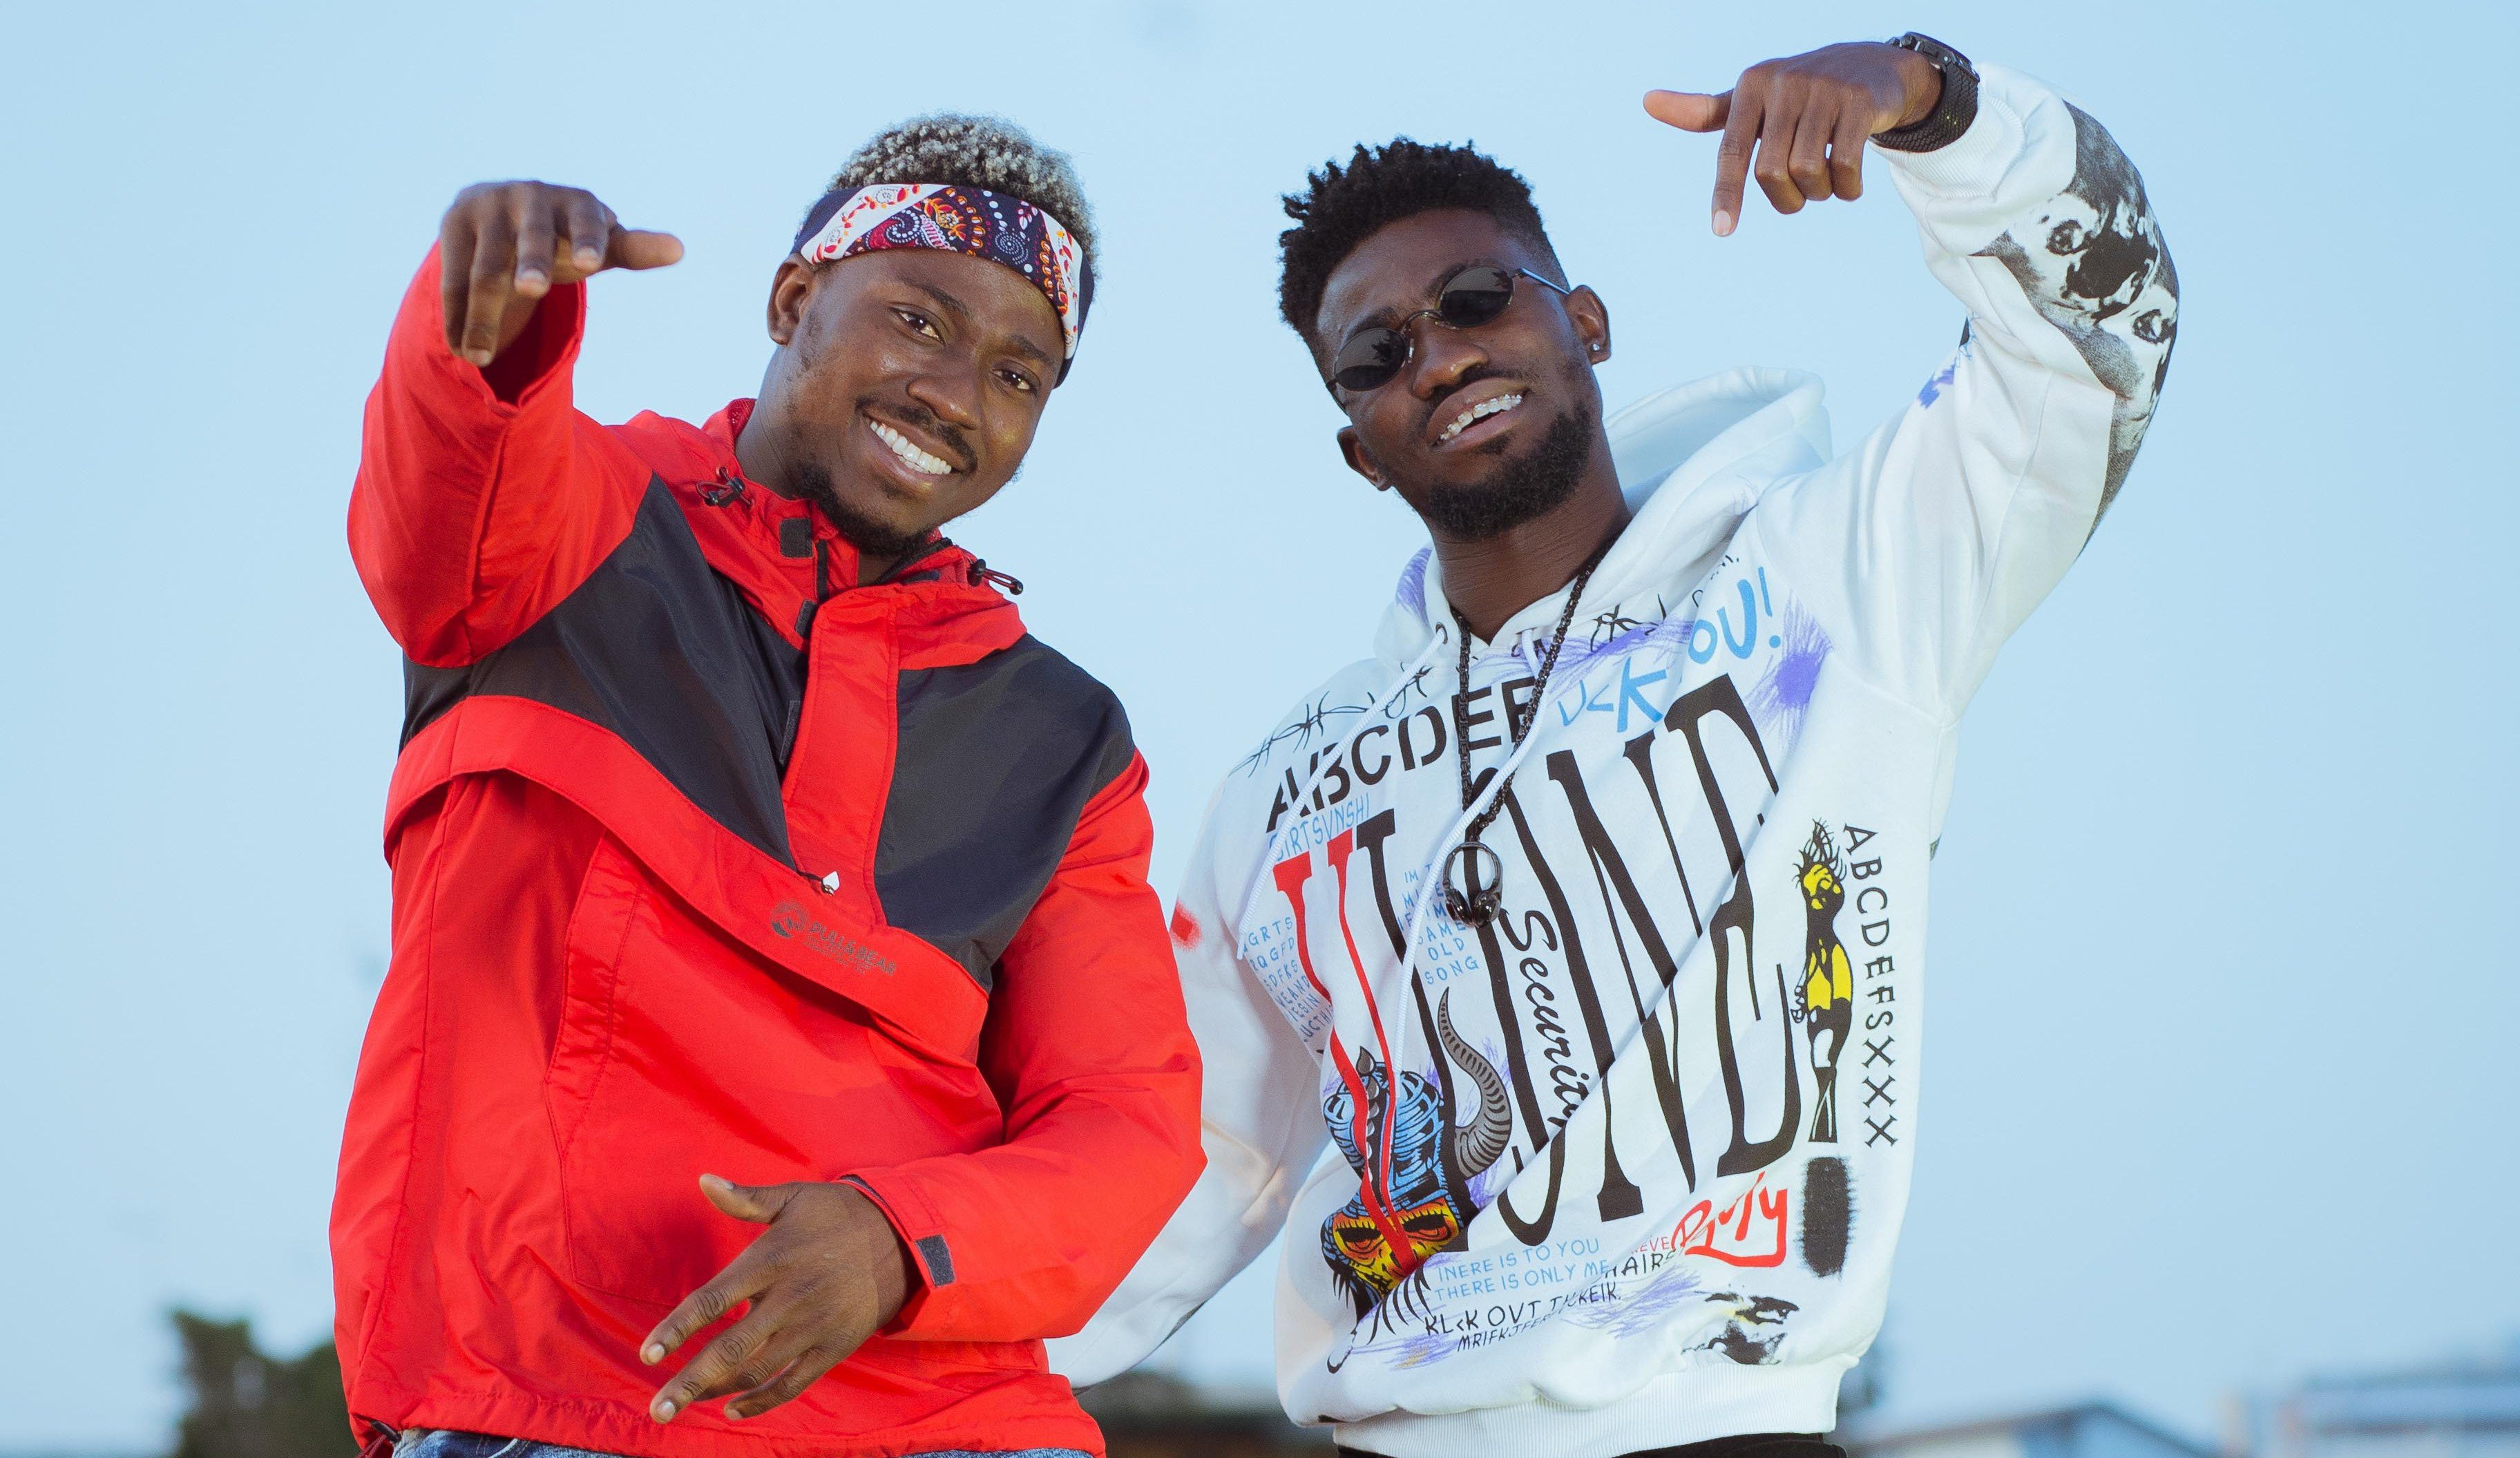 We have the best music video in Ghana currently – ZeeTM